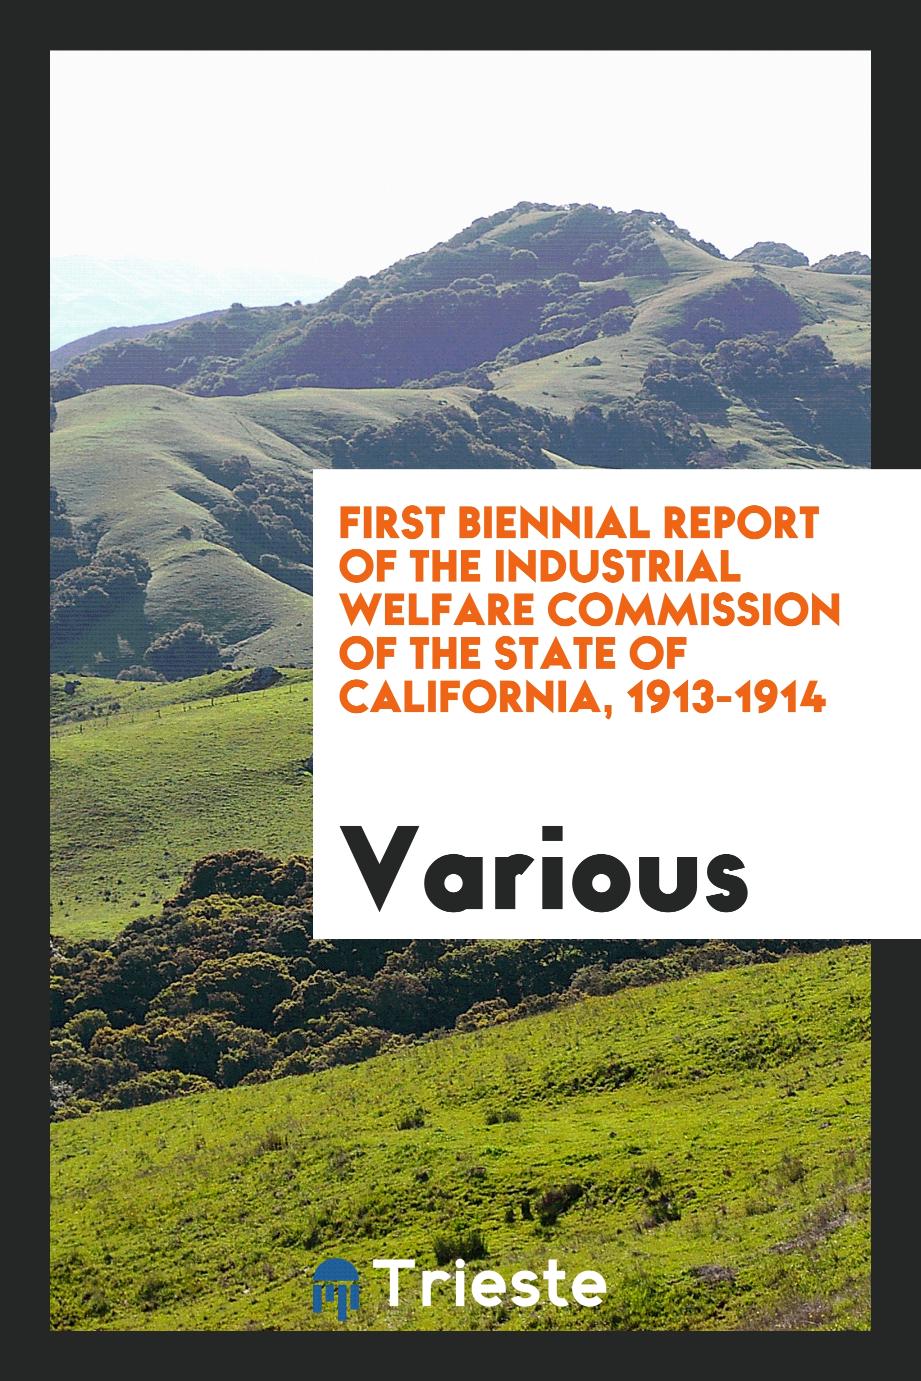 First Biennial Report of the Industrial Welfare Commission of the State of California, 1913-1914